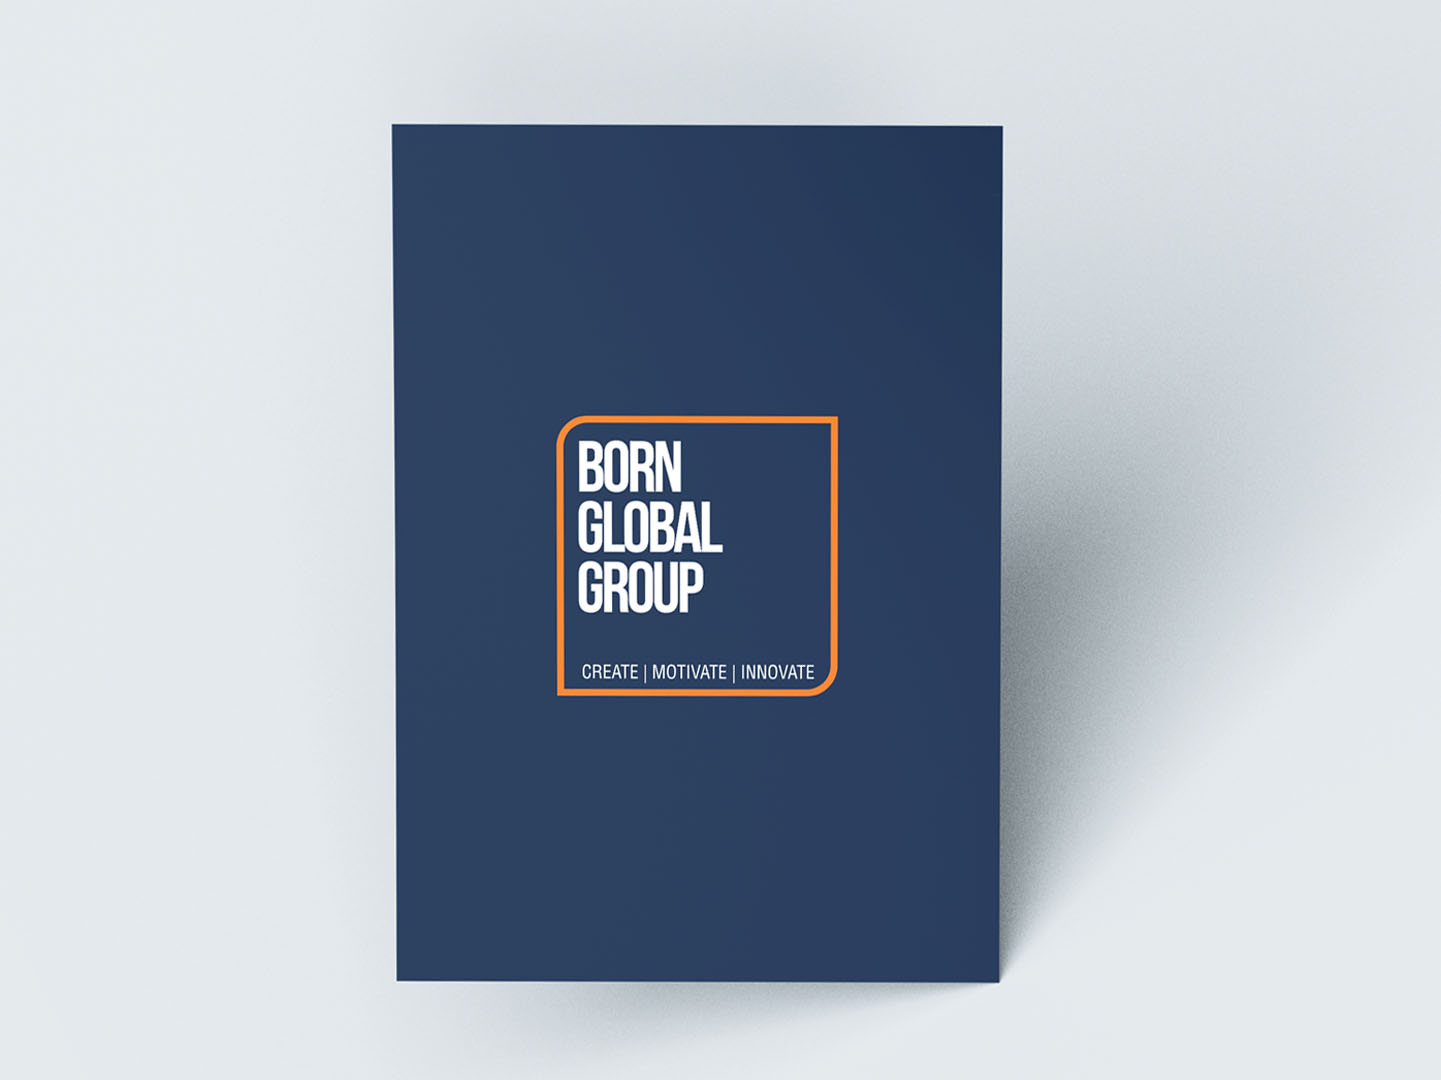 Borng Global Group logo printed on an a4 card